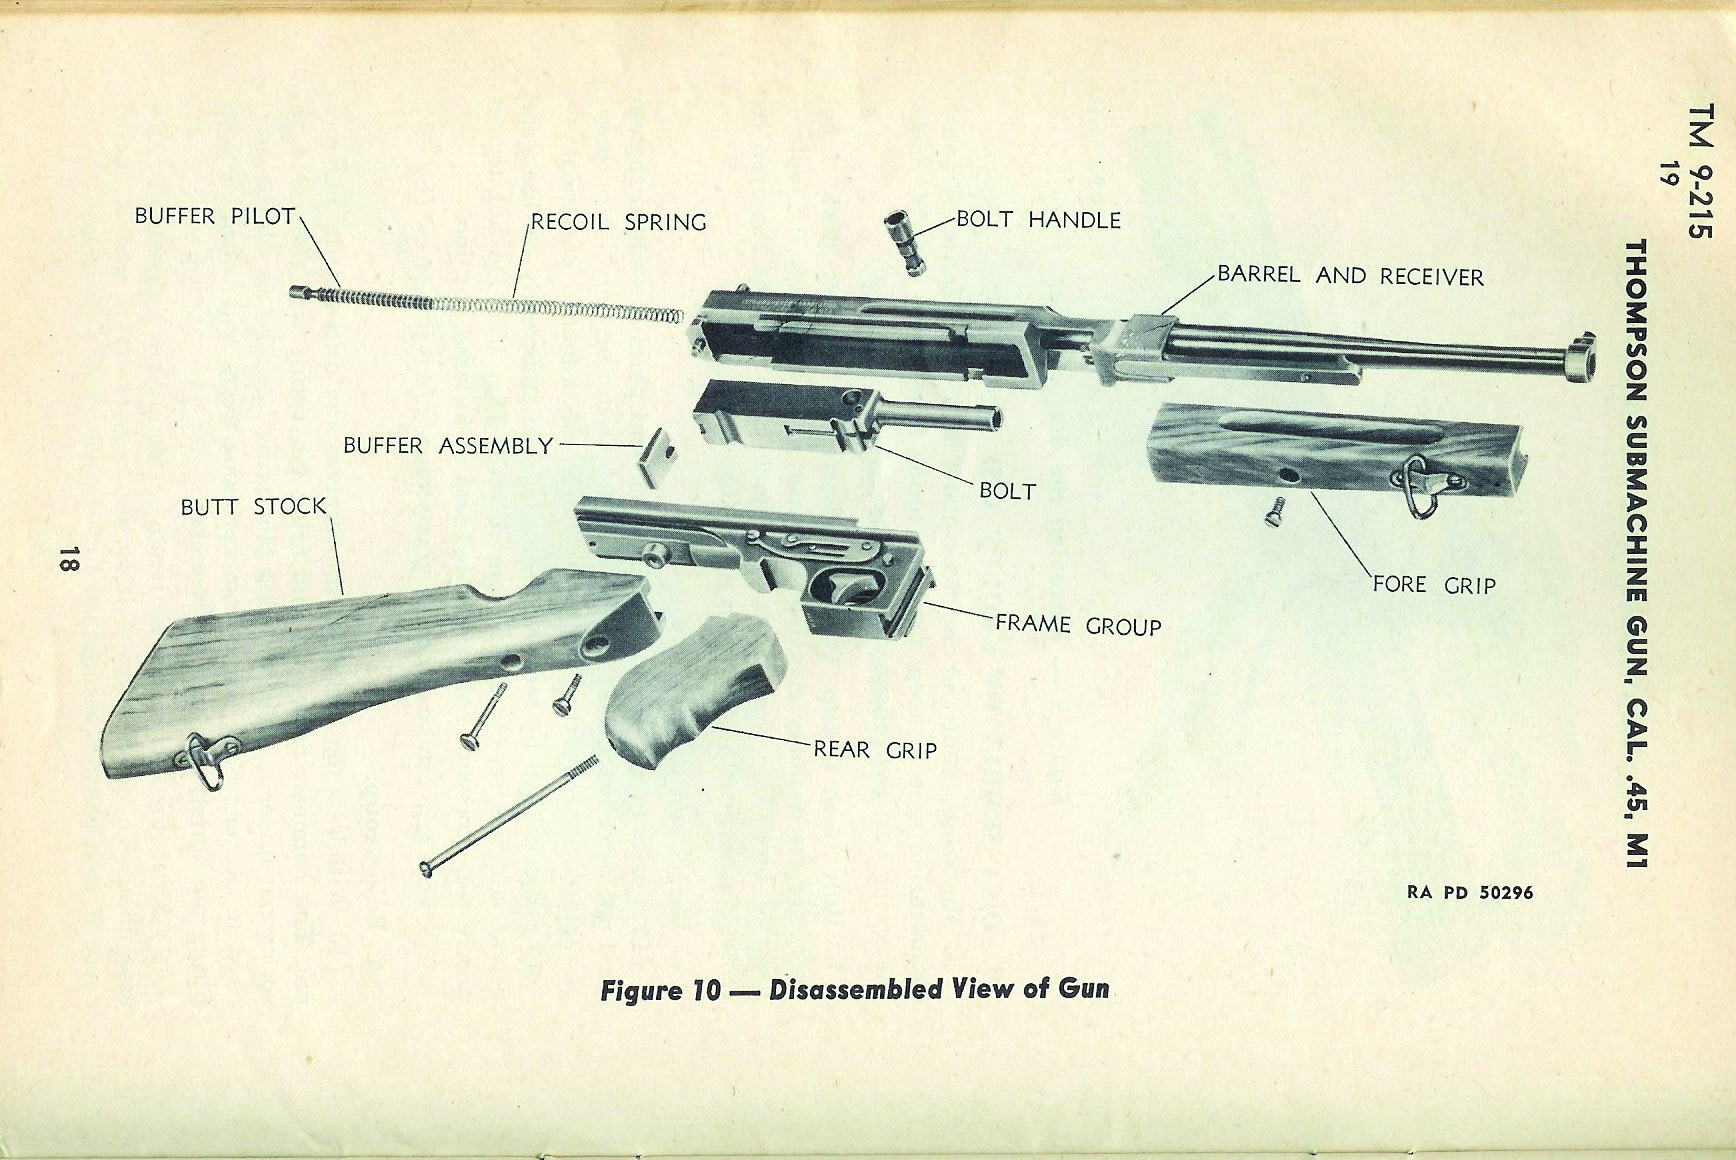 The breakdown of an M1 Thompson machine gun, typical of those shown in Technical Manuals. 